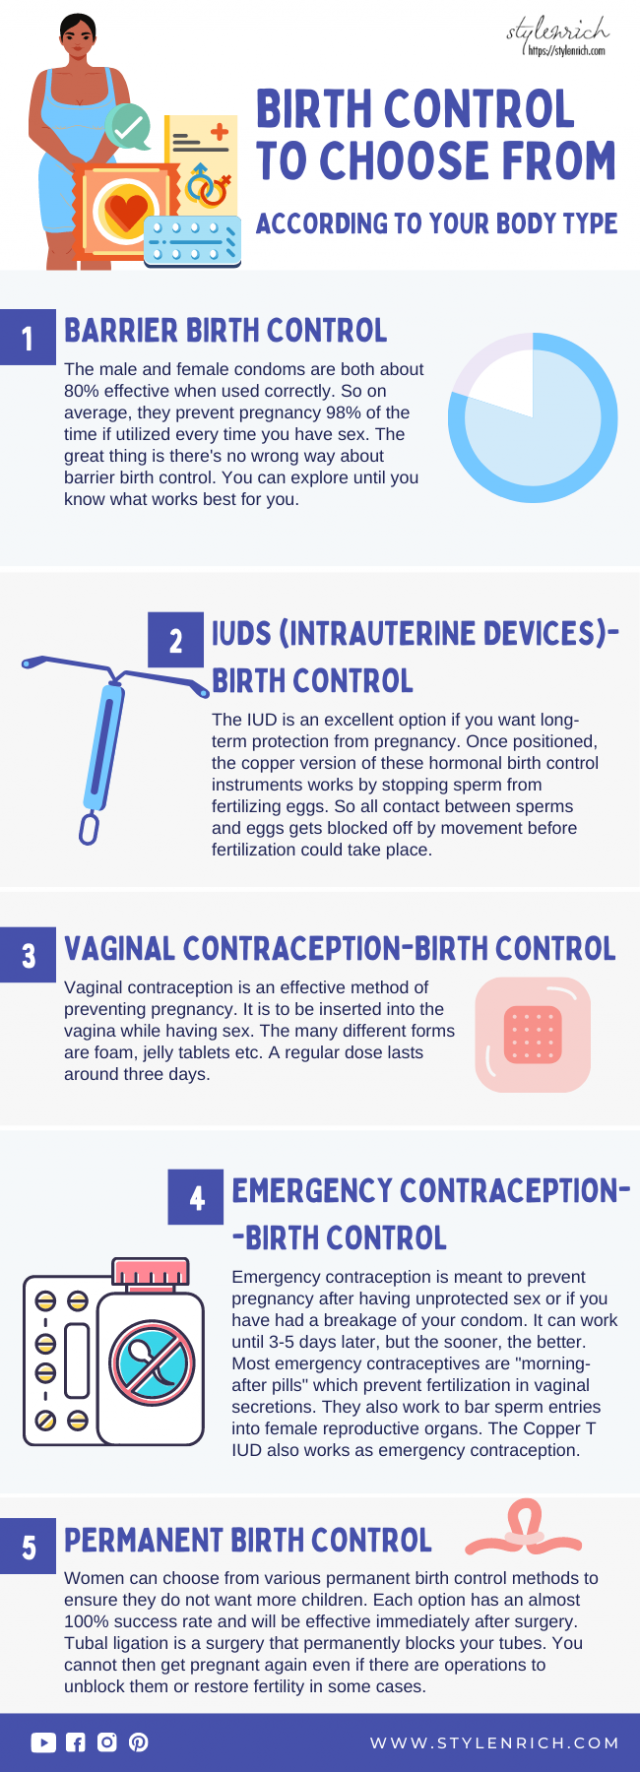 Birth Controls Methods You Should Be Aware Of